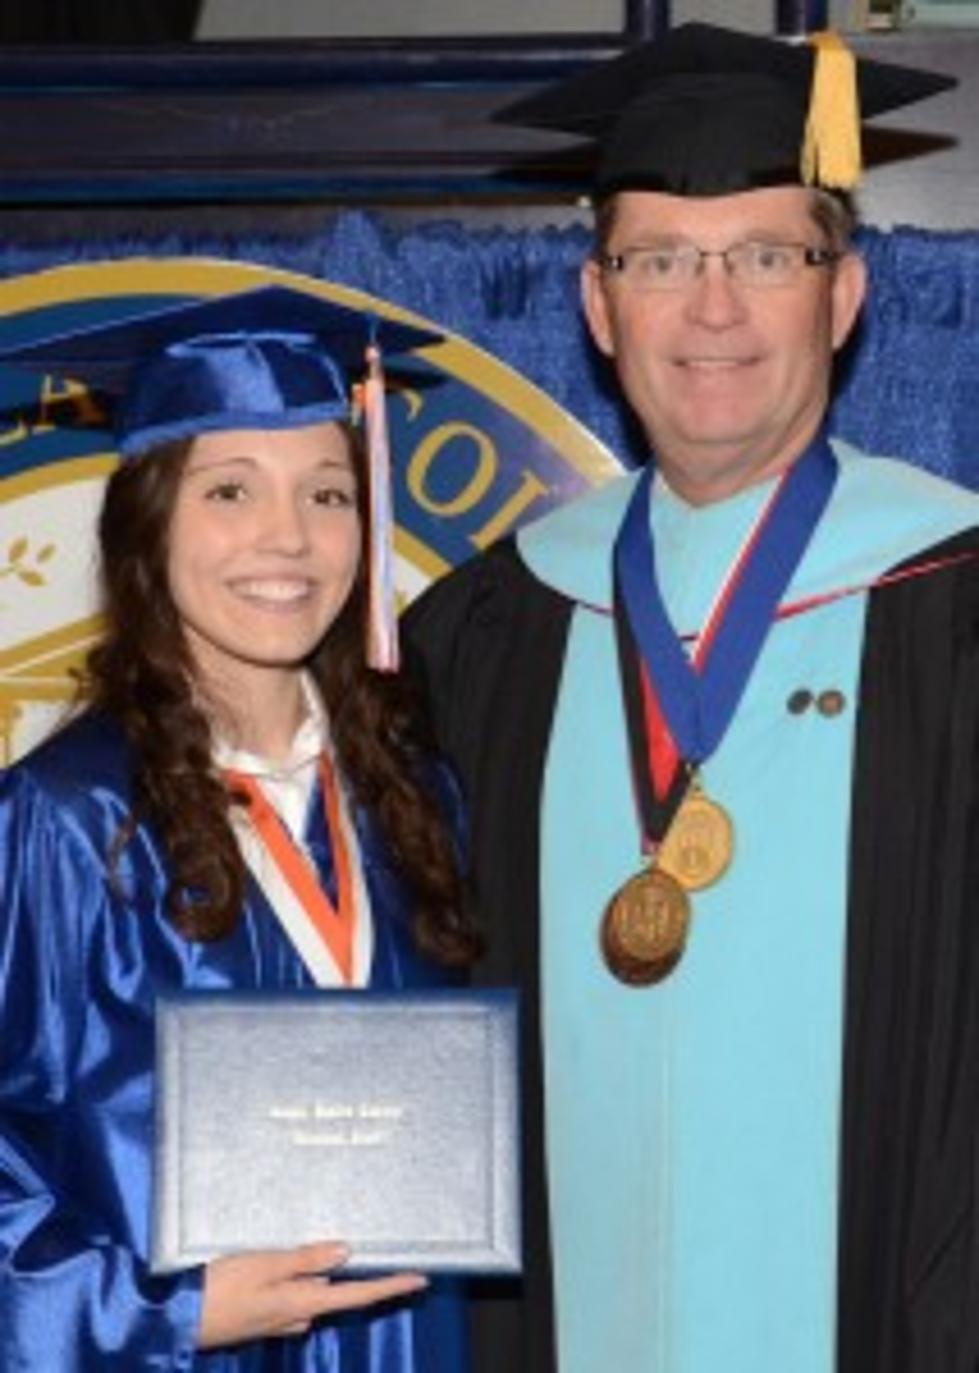 South Plains College Names VanZandt as Student of the Year